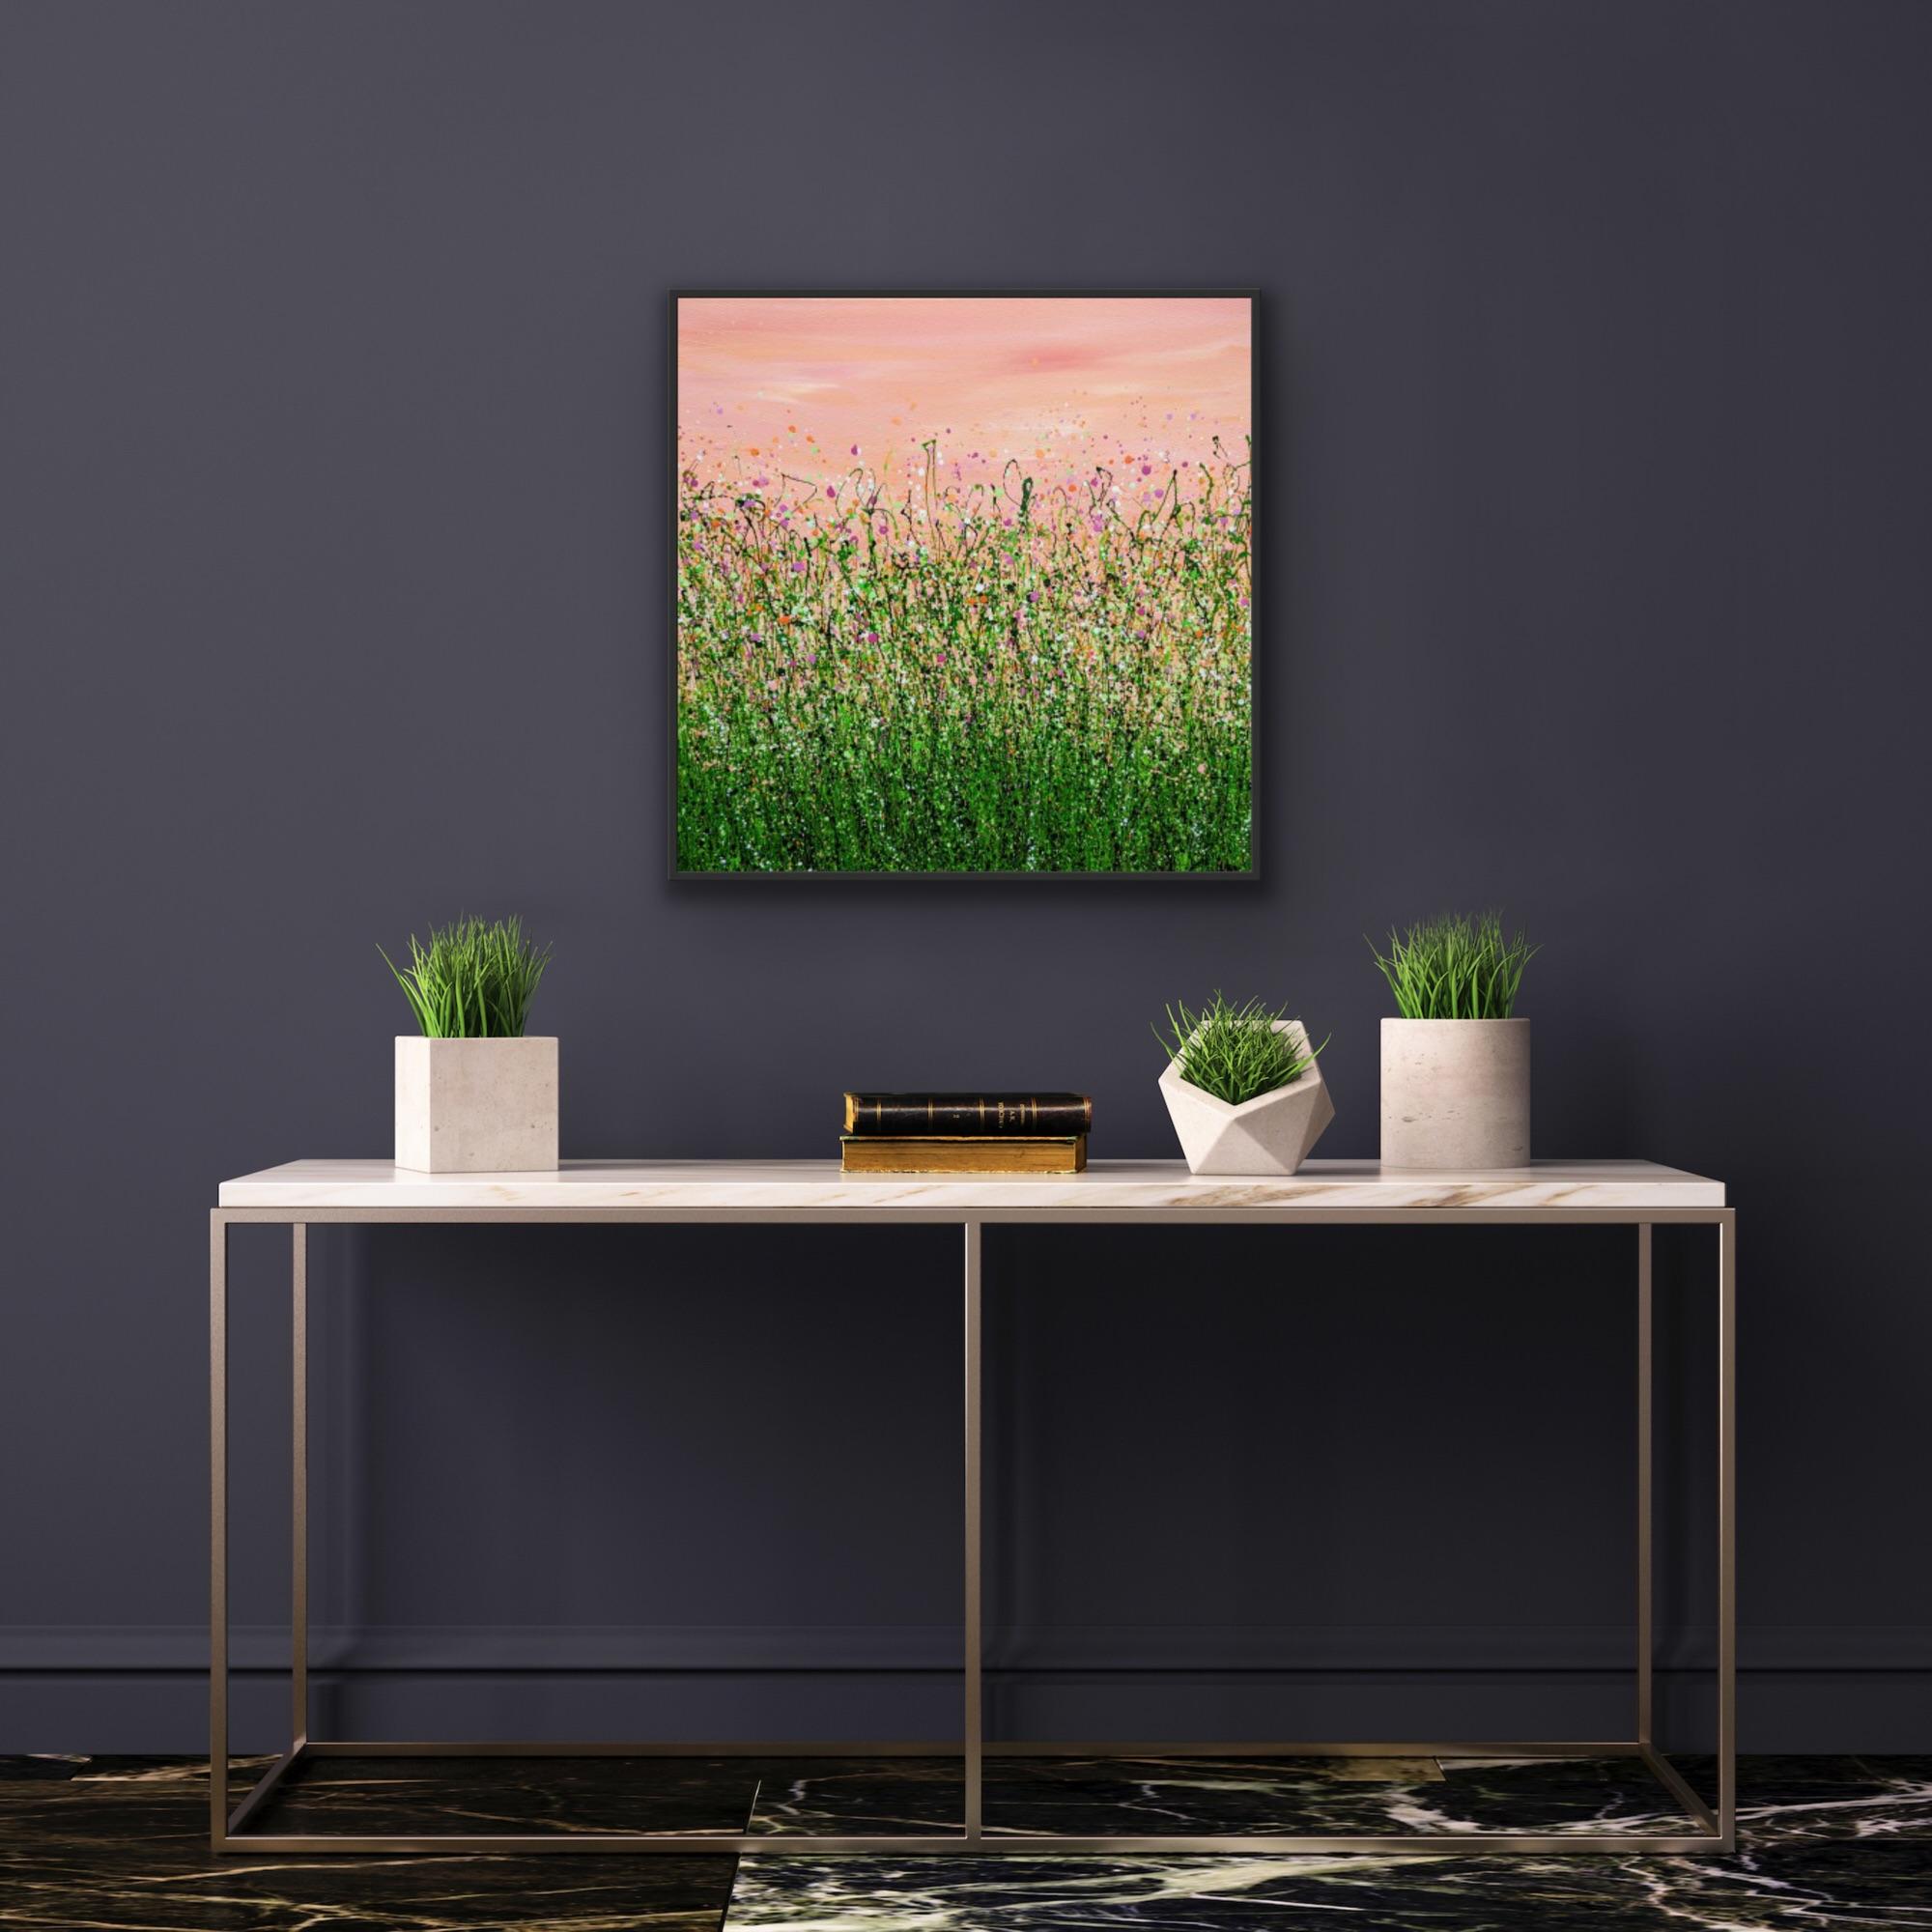 Peaches & Cream Meadow Delight by Lucy Moore [2022]
original and hand signed by the artist 
Acrylic on canvas
Image size: H:60 cm x W:60 cm
Complete Size of Unframed Work: H:60 cm x W:60 cm x D:1.5cm
Sold Unframed
Please note that insitu images are